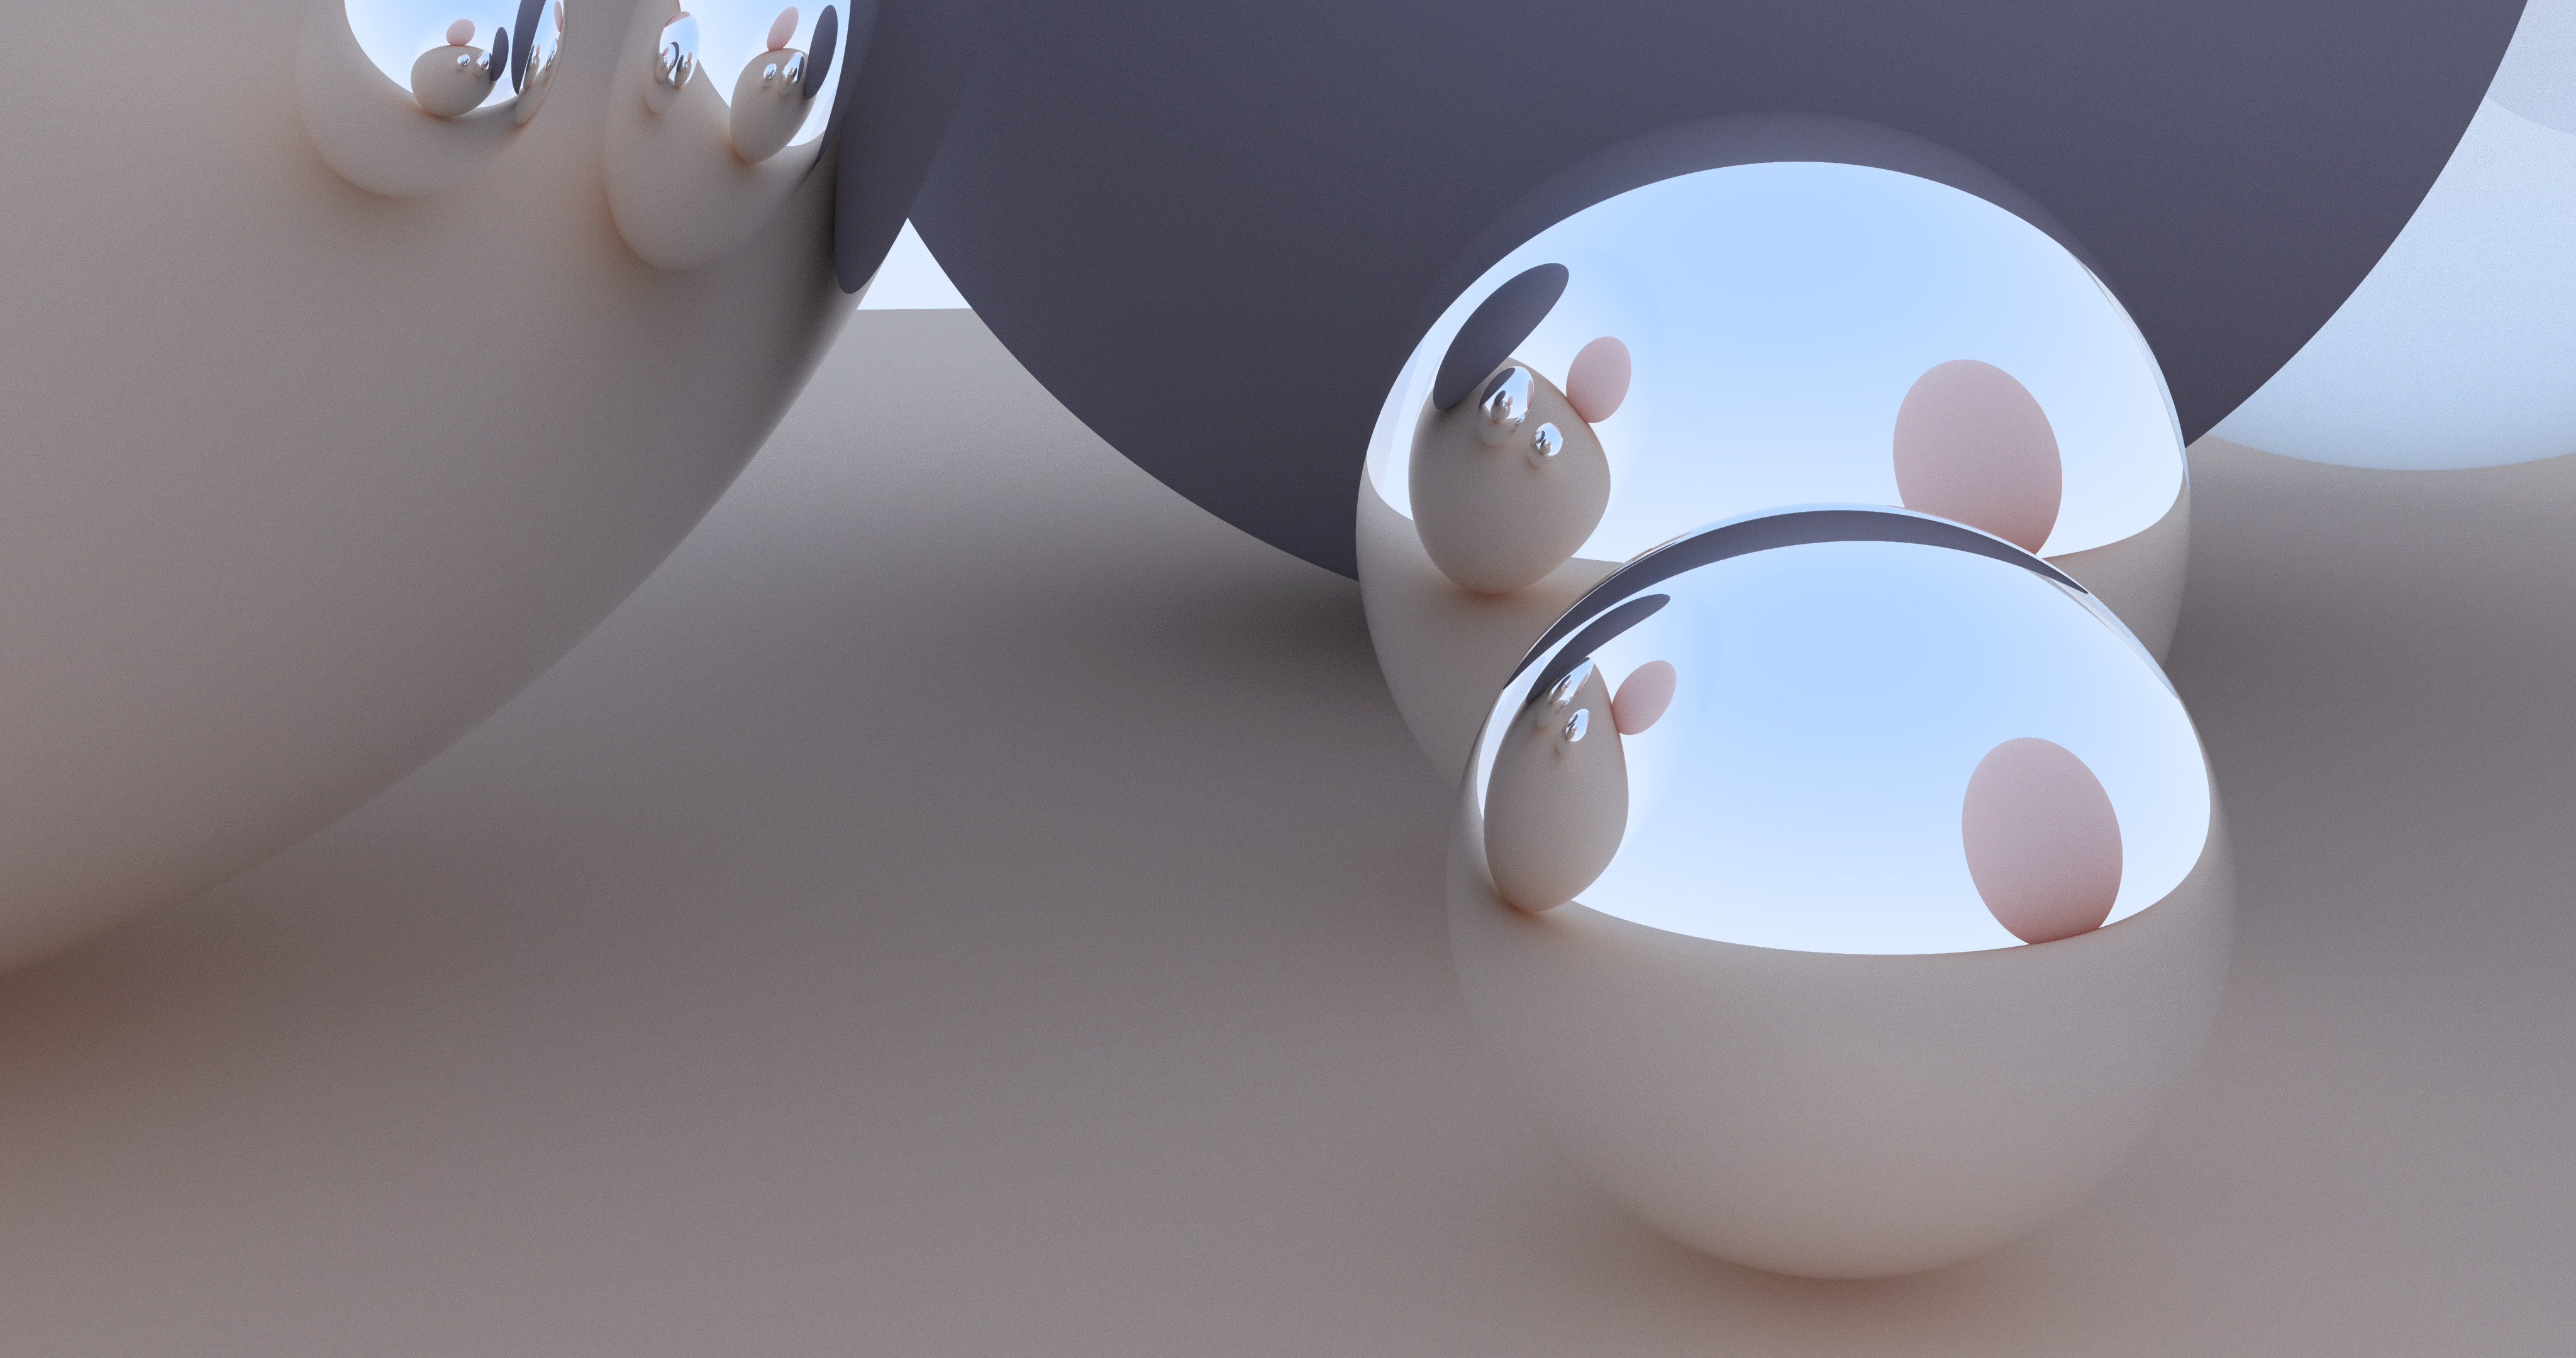 Ray-traced image created using the Wrend library